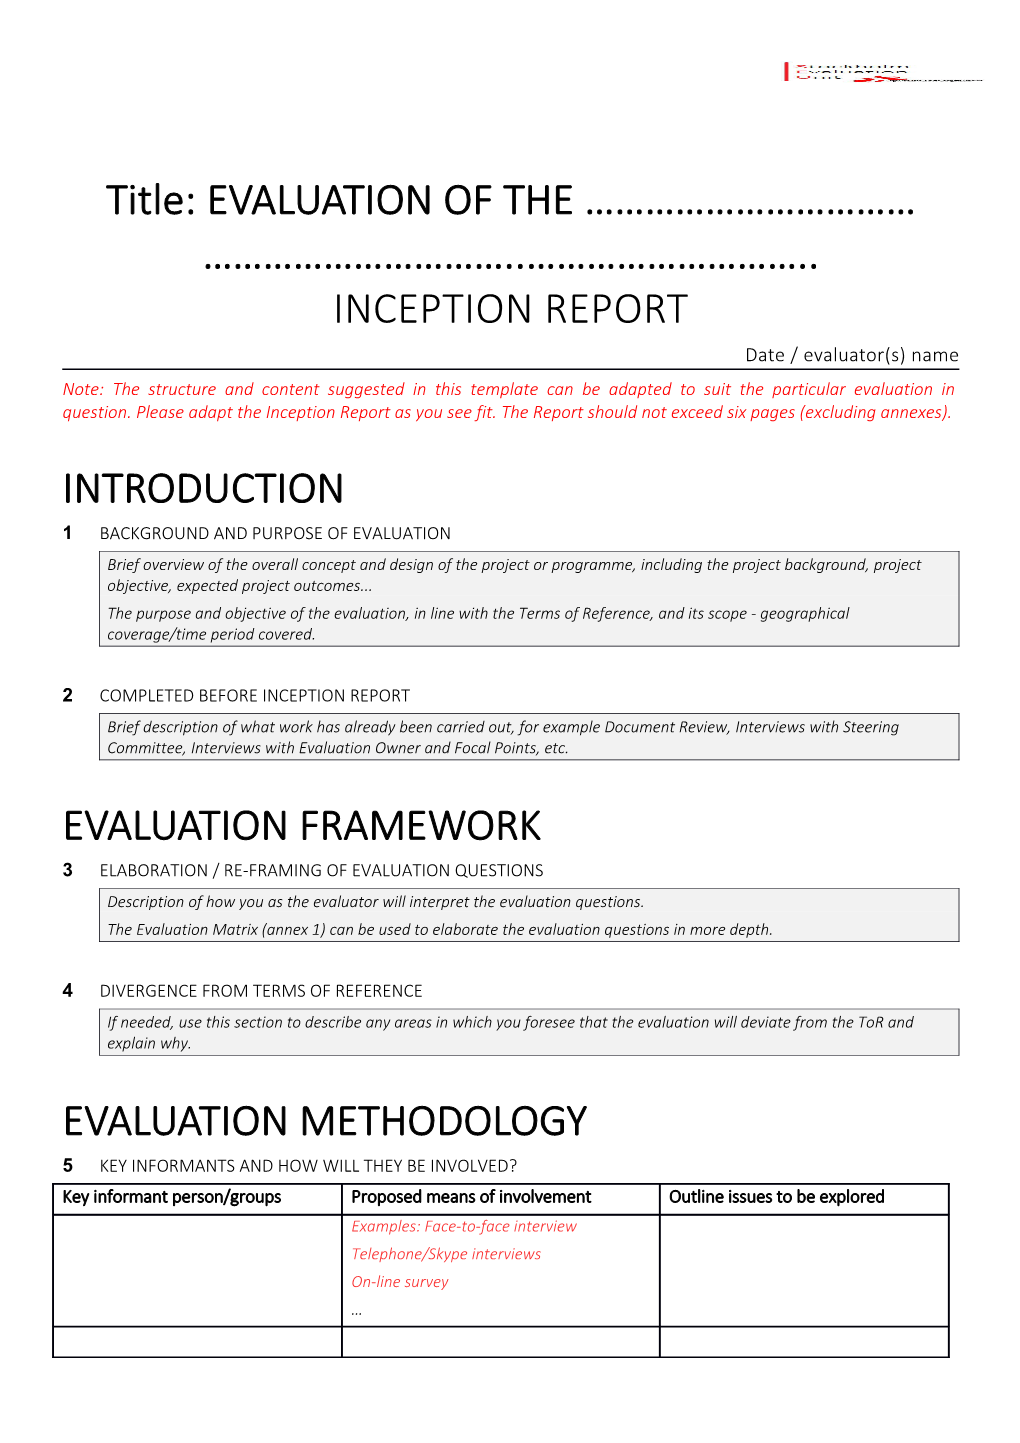 Title: EVALUATION of the INCEPTION REPORT